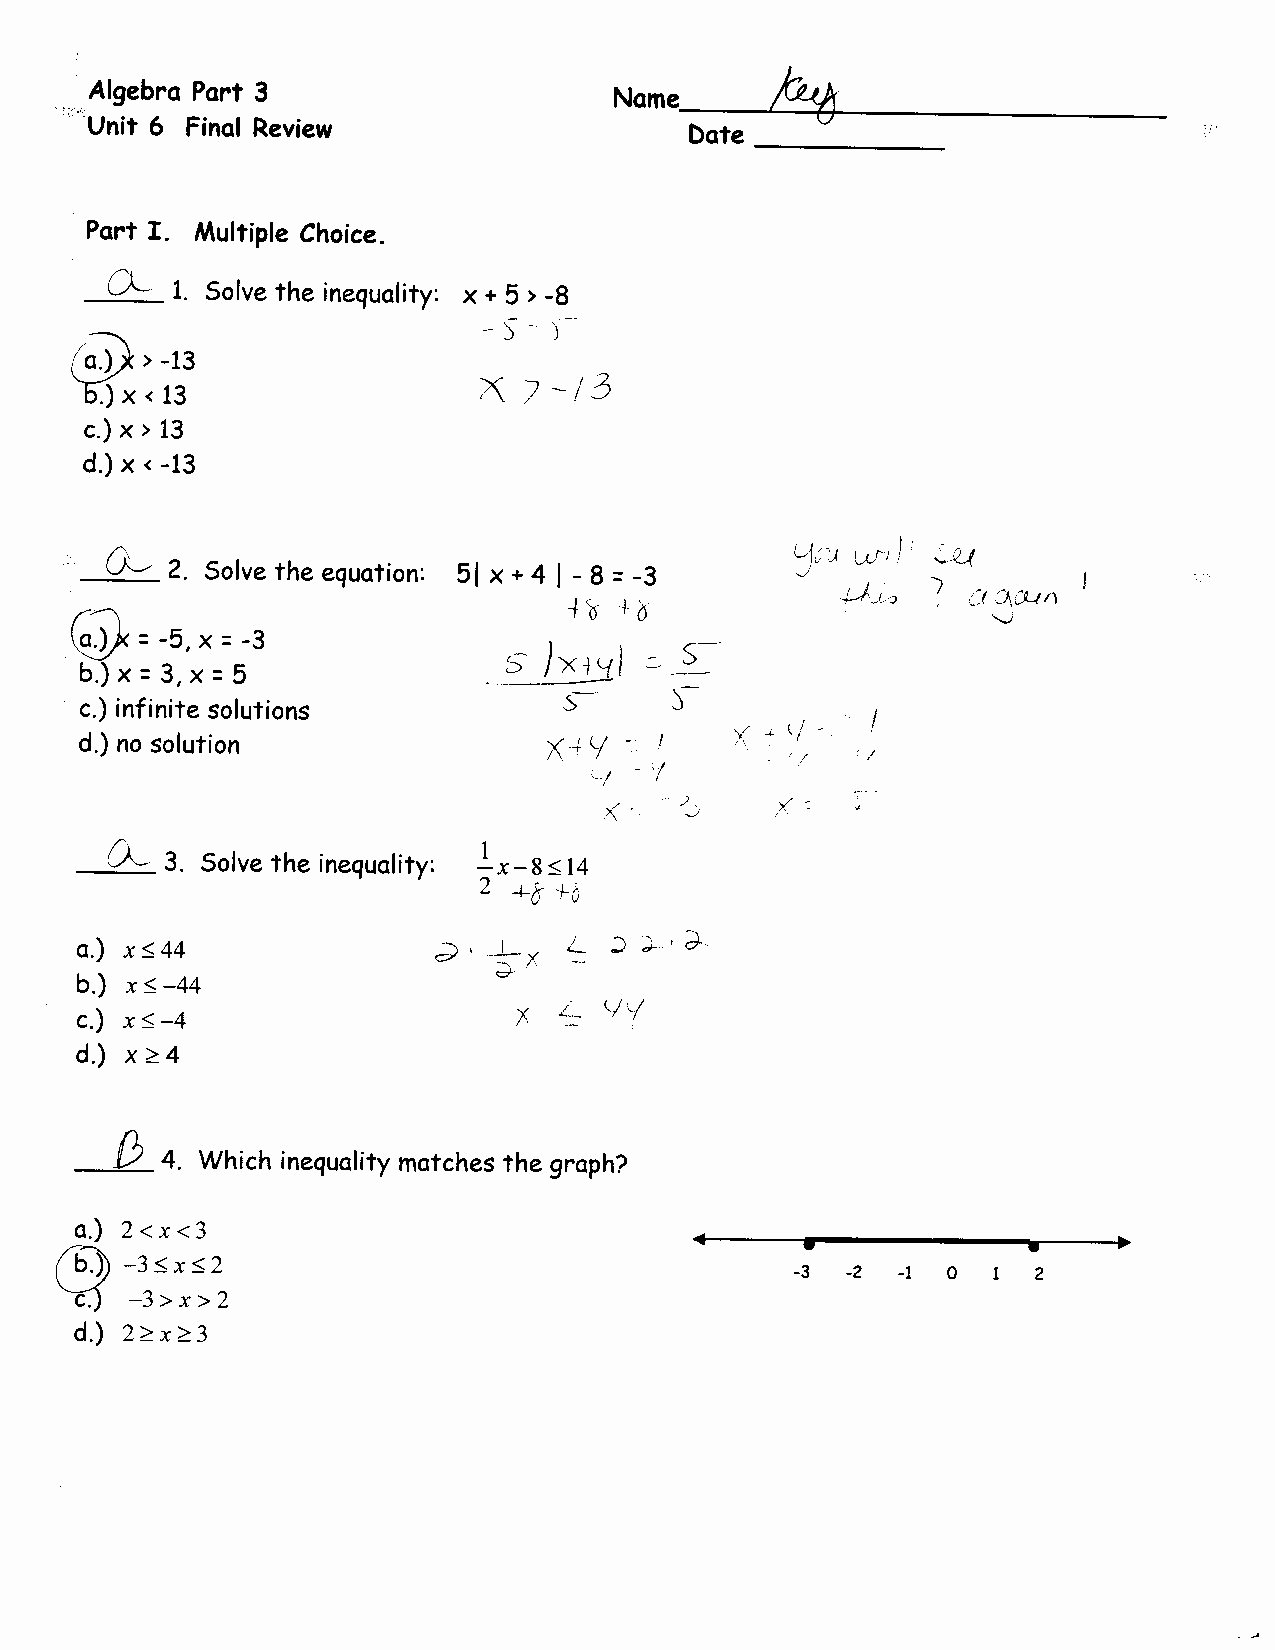 Solving Polynomial Equations Worksheet Answers Lovely 5 3 solving Polynomial Equations Worksheet Answers